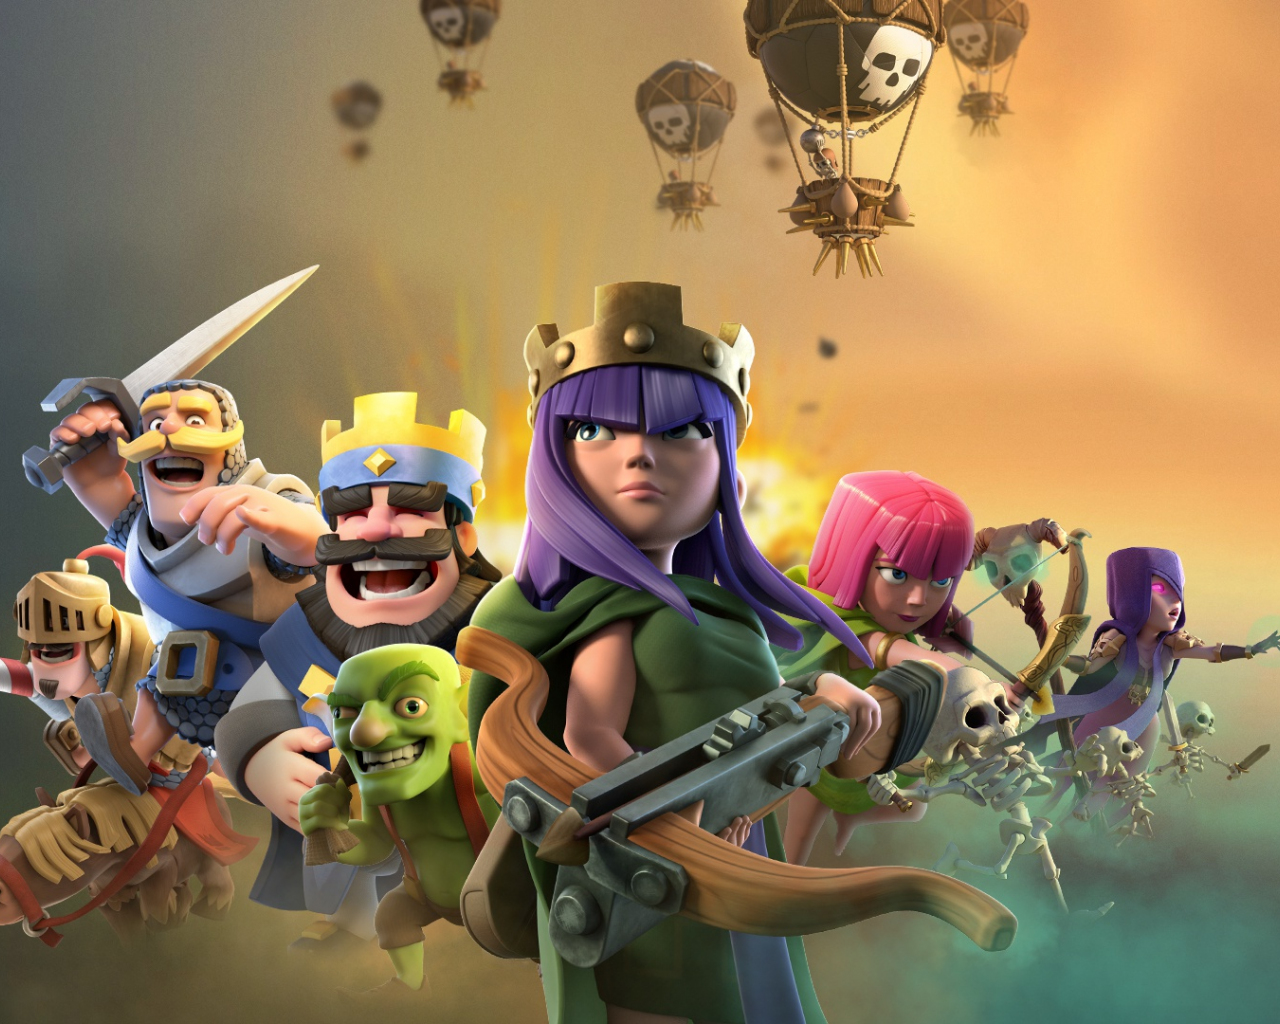 Download 1280x1024 Wallpaper Clash Of Clans, Mobile Game, Archer, Barbarian  Army, Standard 5:4, Fullscreen, 1280x1024 Hd Image, Background, 18973